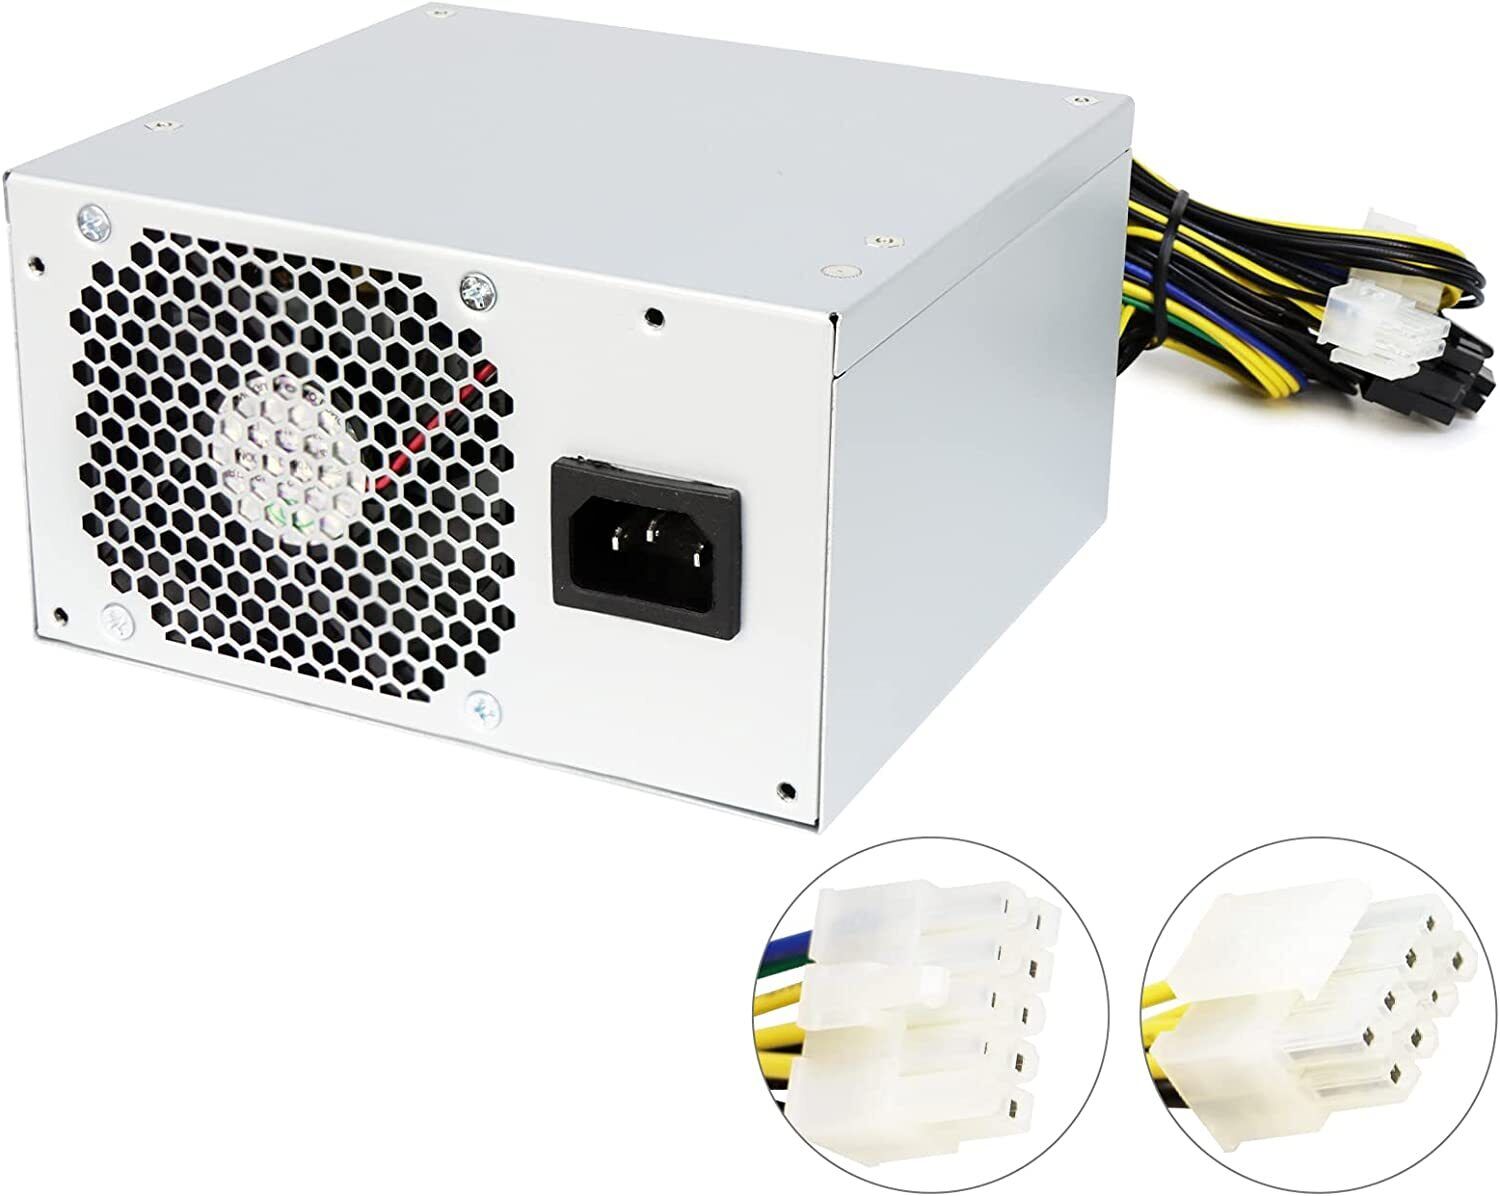 New Power Supply For Lenovo 500W HK600-11PP P340 P330 P350 P328 P310 5P50V03181. Available Now for 148.41